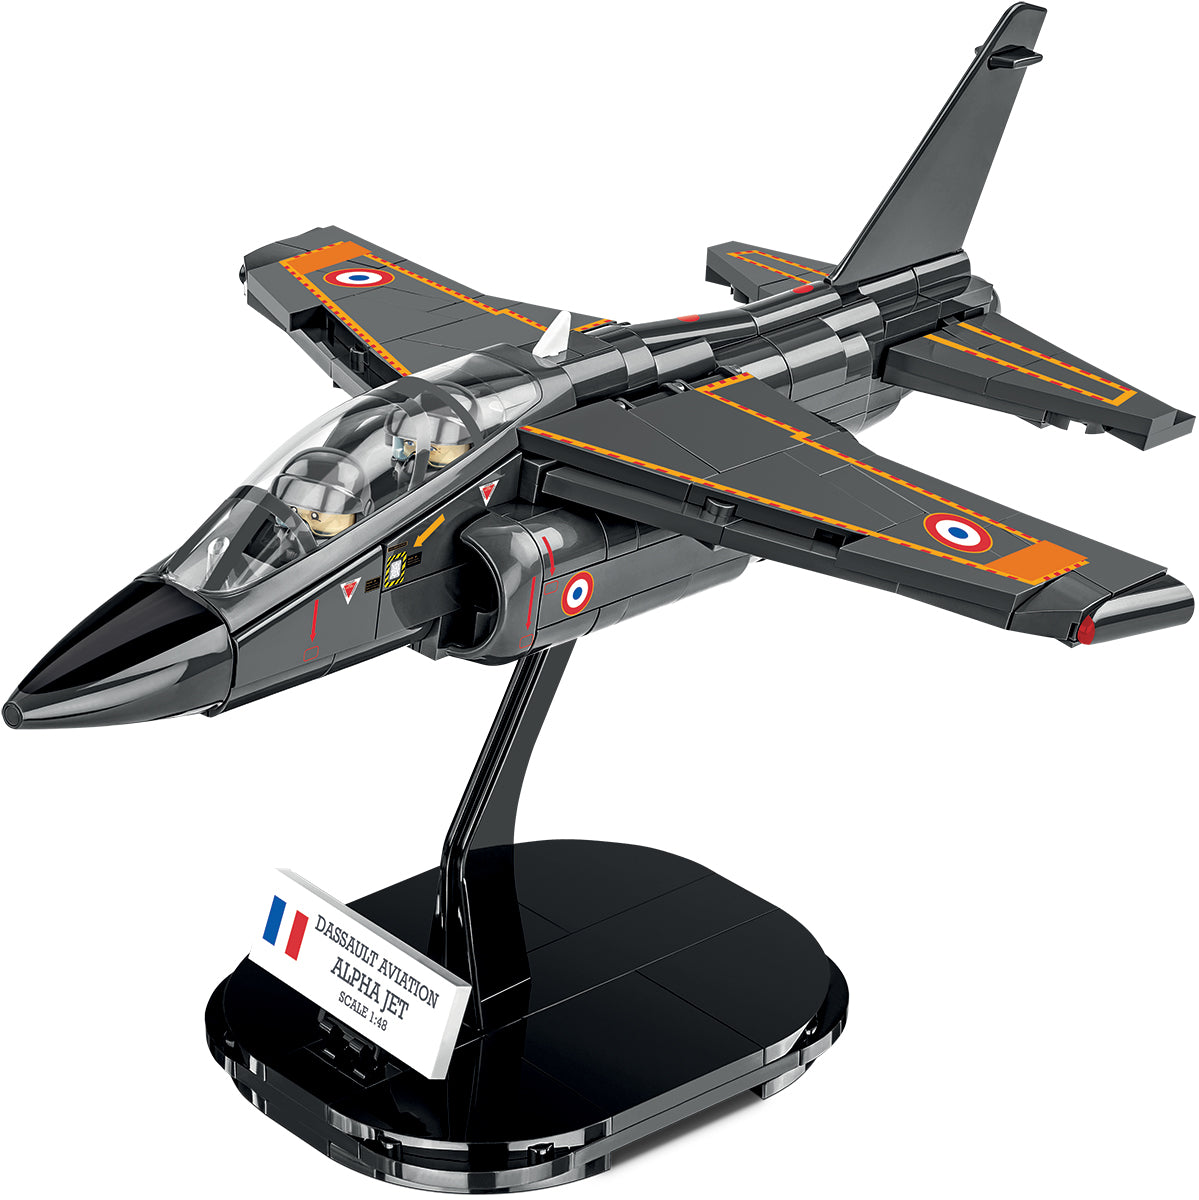 Cobi 5842 Alpha Jet French Air Force